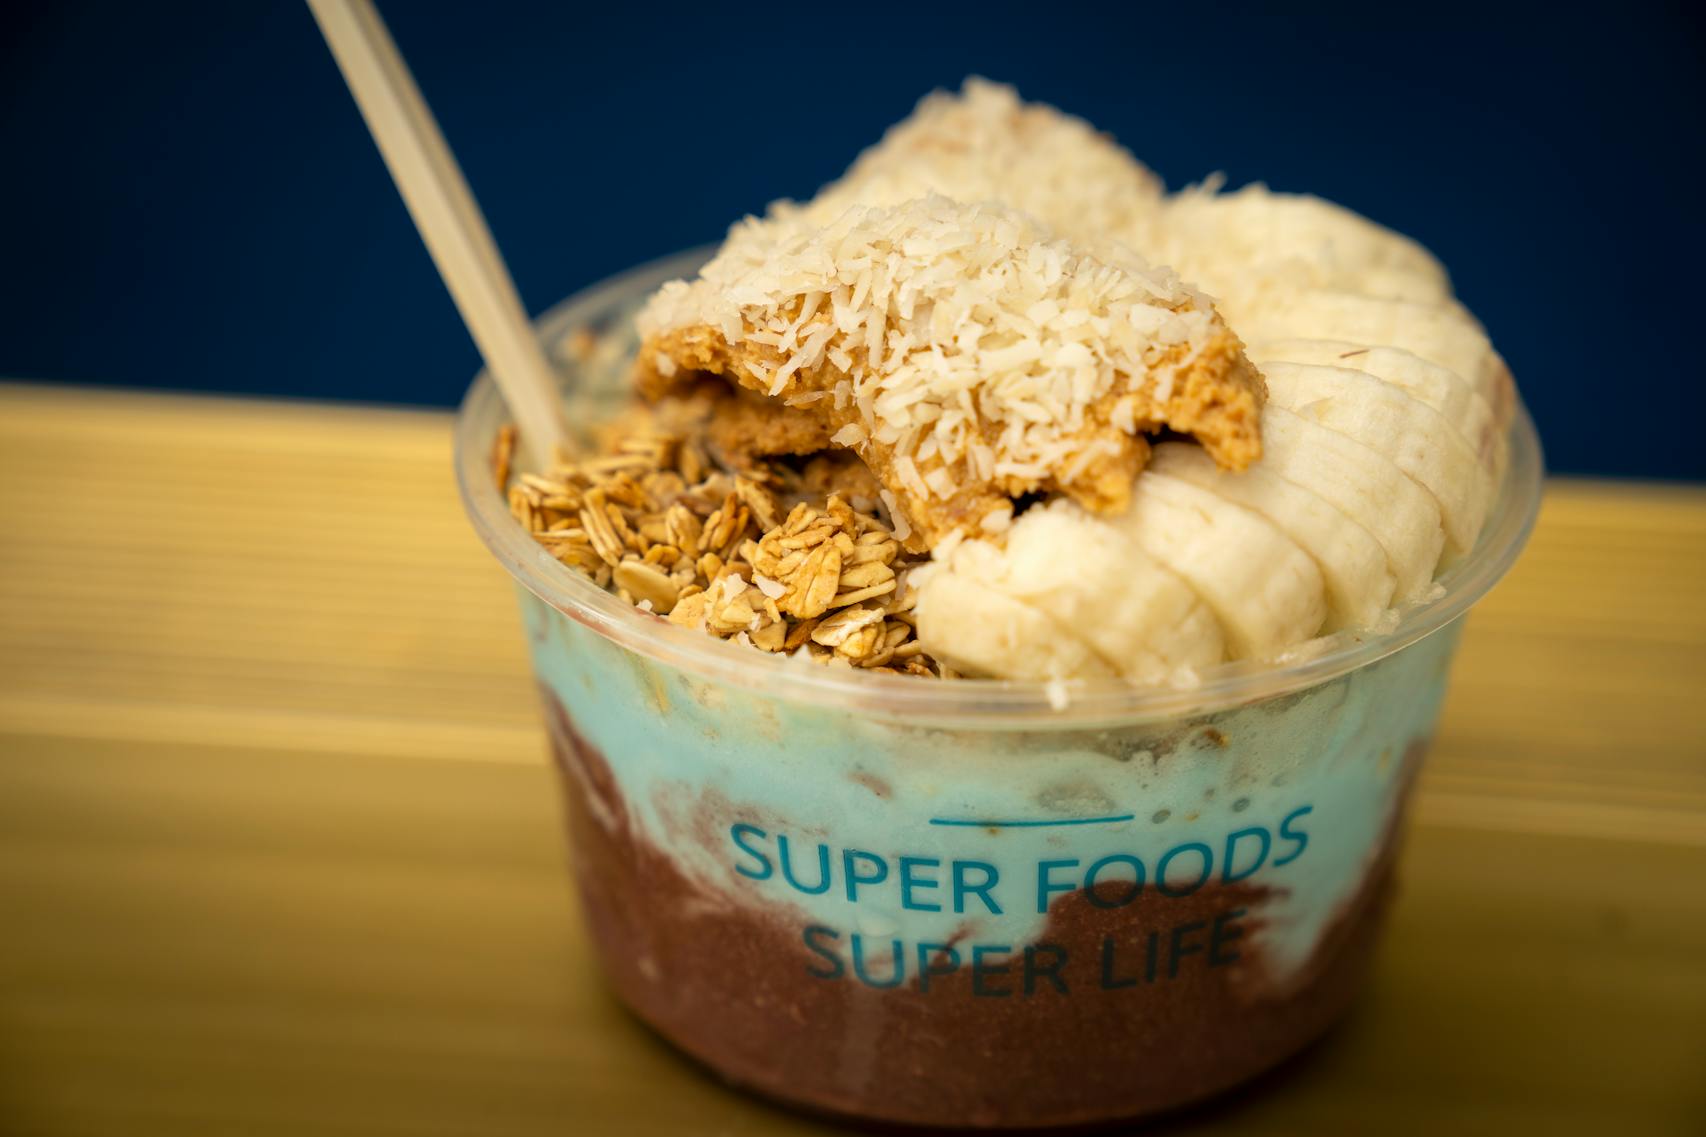 State Fair Bowl from Nautical Bowls. The new foods of the 2023 Minnesota State Fair photographed on the first day of the fair in Falcon Heights, Minn. on Tuesday, Aug. 8, 2023. ] LEILA NAVIDI • leila.navidi@startribune.com